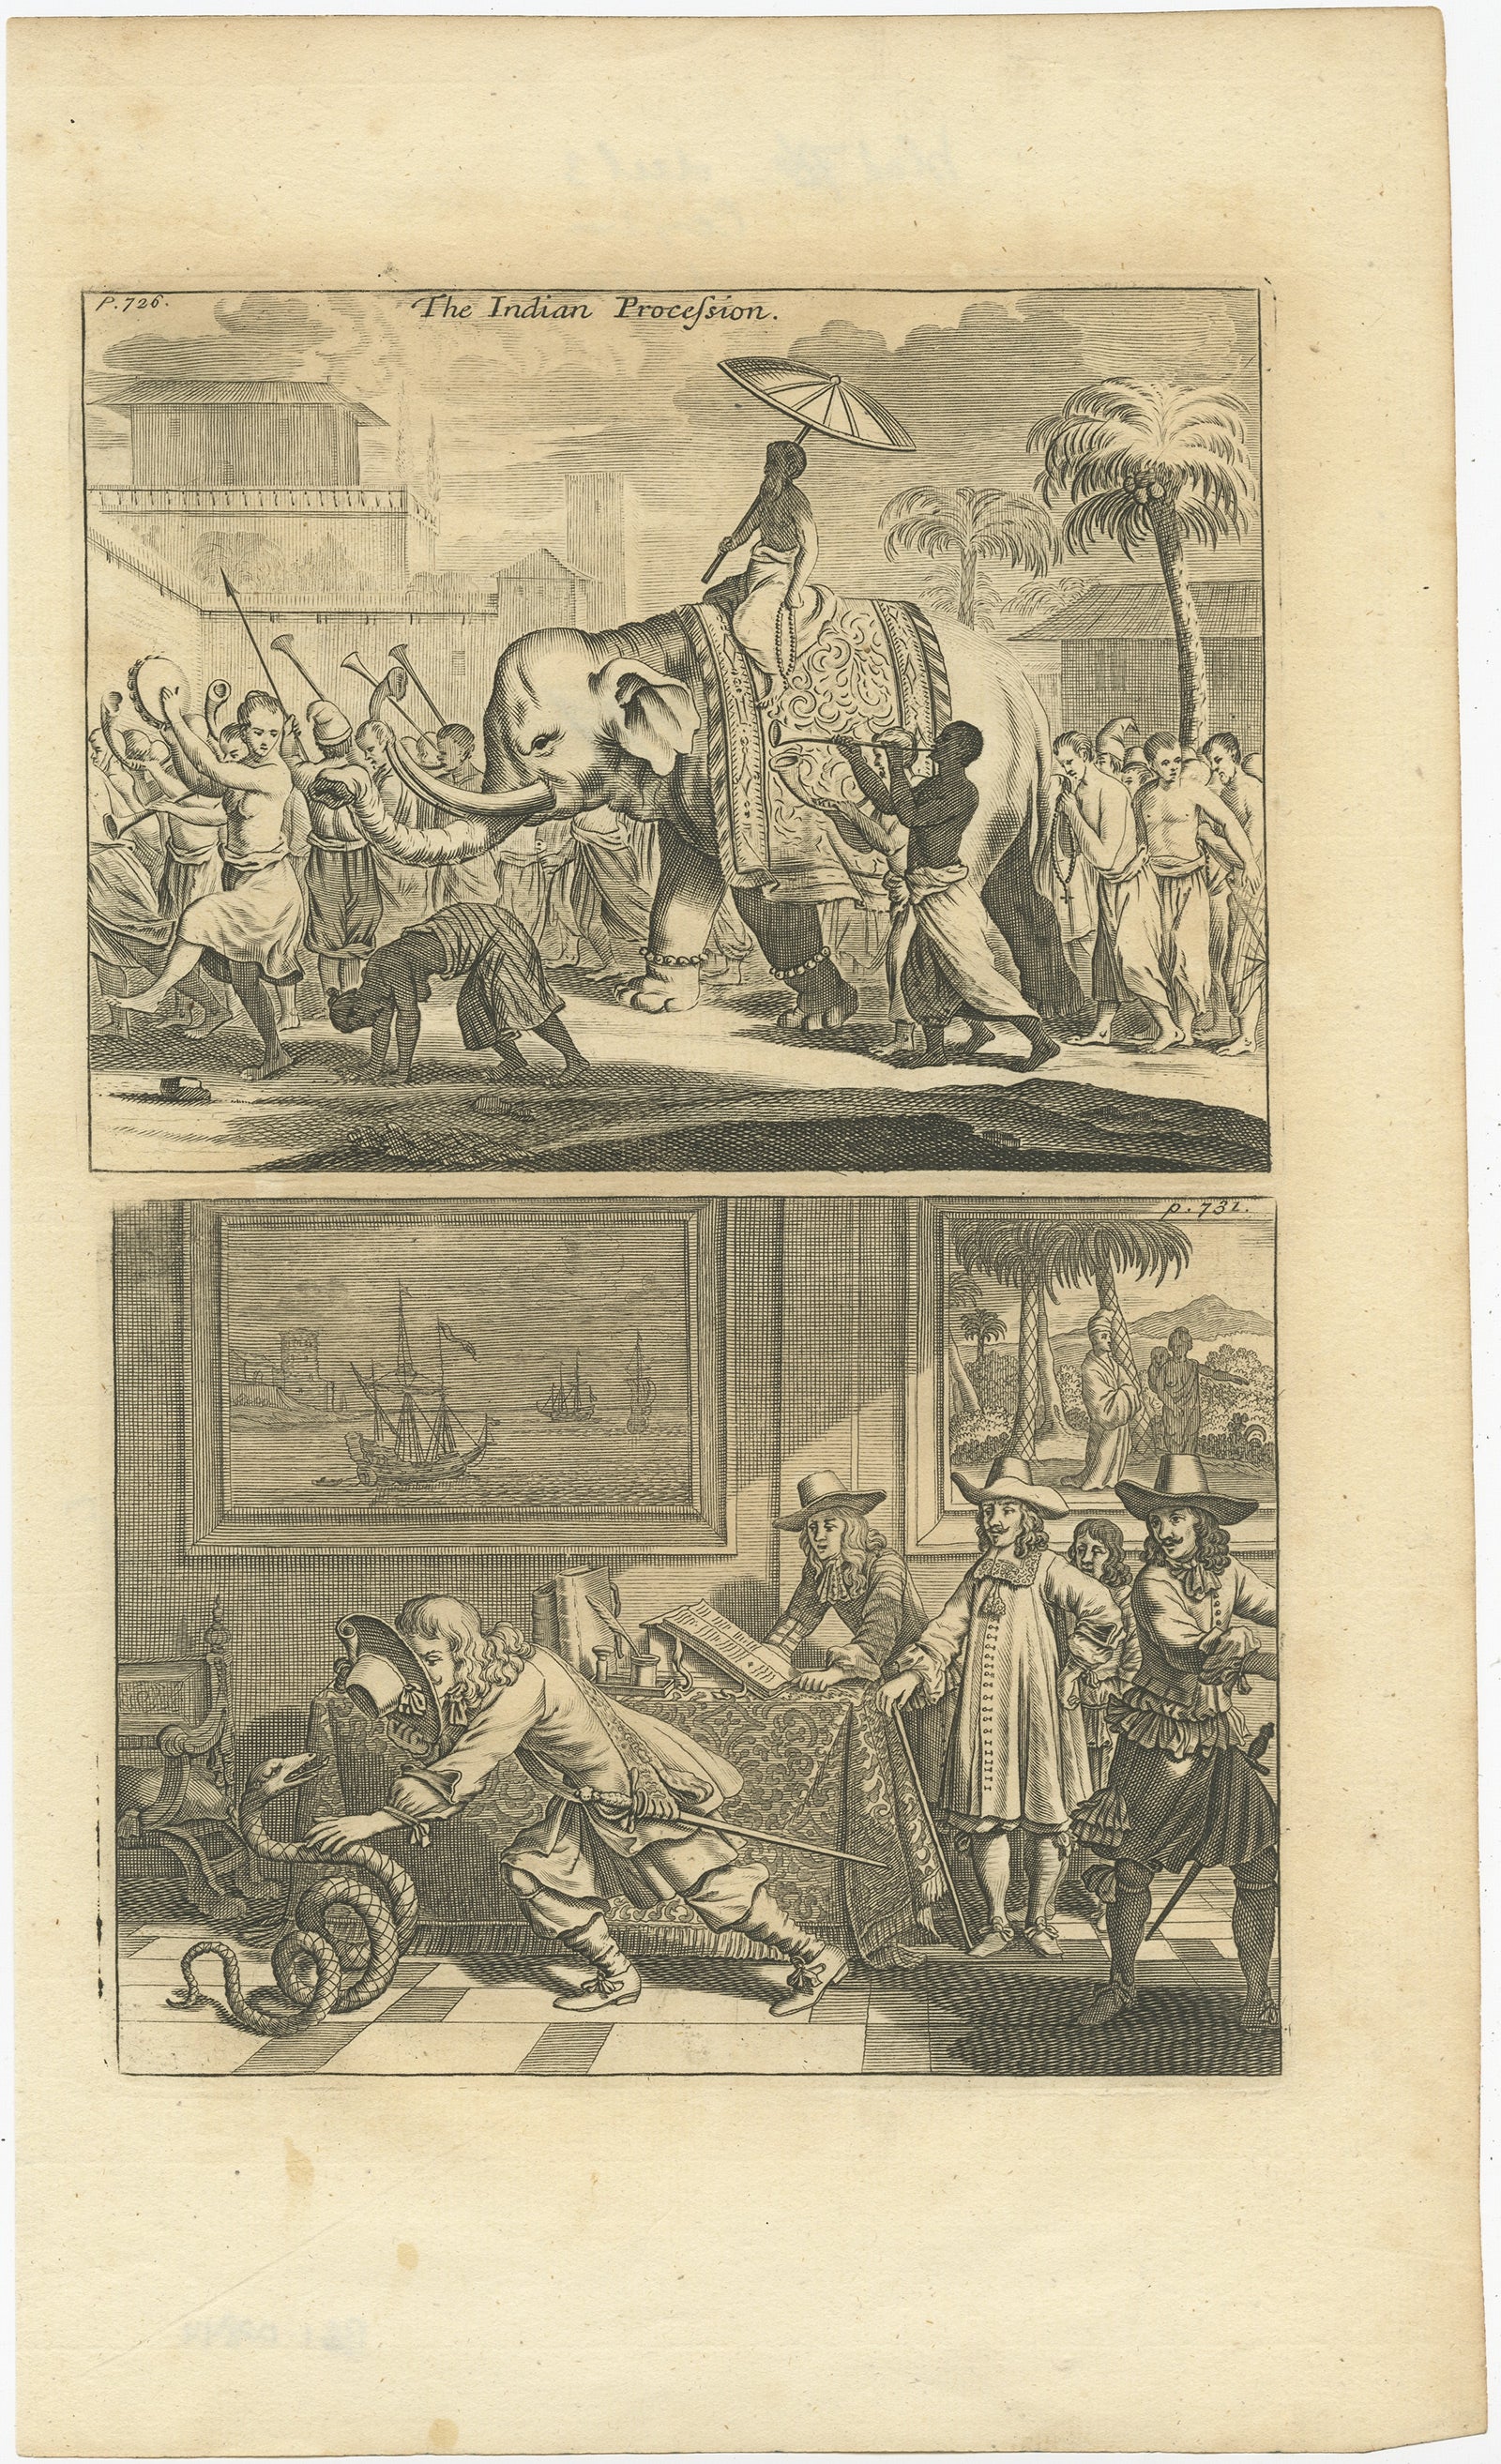 Two images on one sheet titled 'The Indian Procession'. 

The upper image shows a Procession of monks in Ceylon. A group of dancing monks, beating drums, in front of the abbot, seated on an elephant. The lower image depicts the catching of a snake.